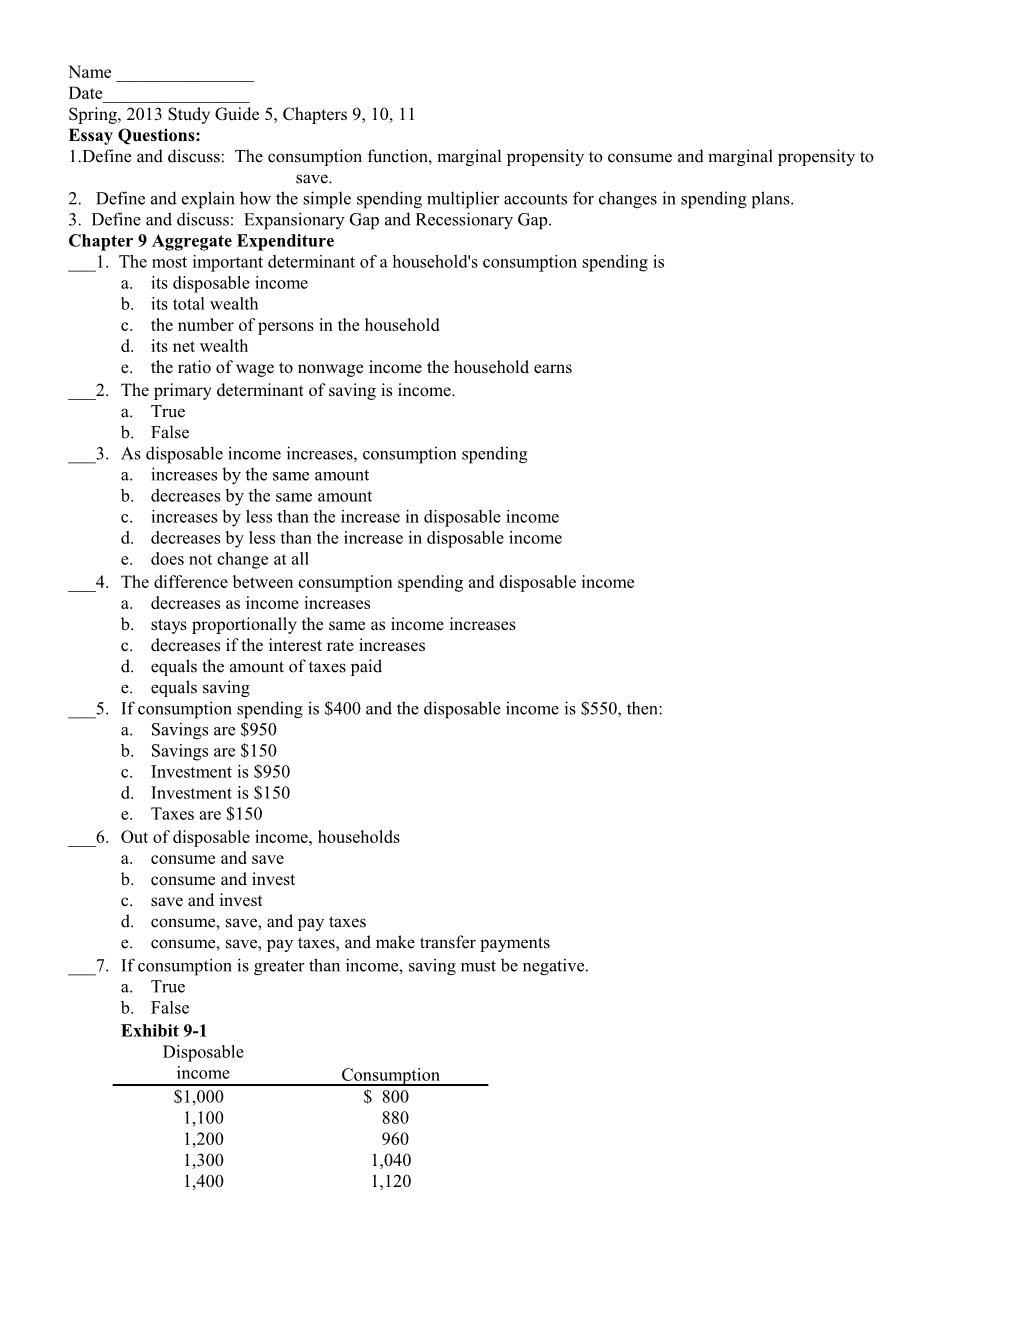 Spring, 2013 Study Guide 5, Chapters 9, 10, 11